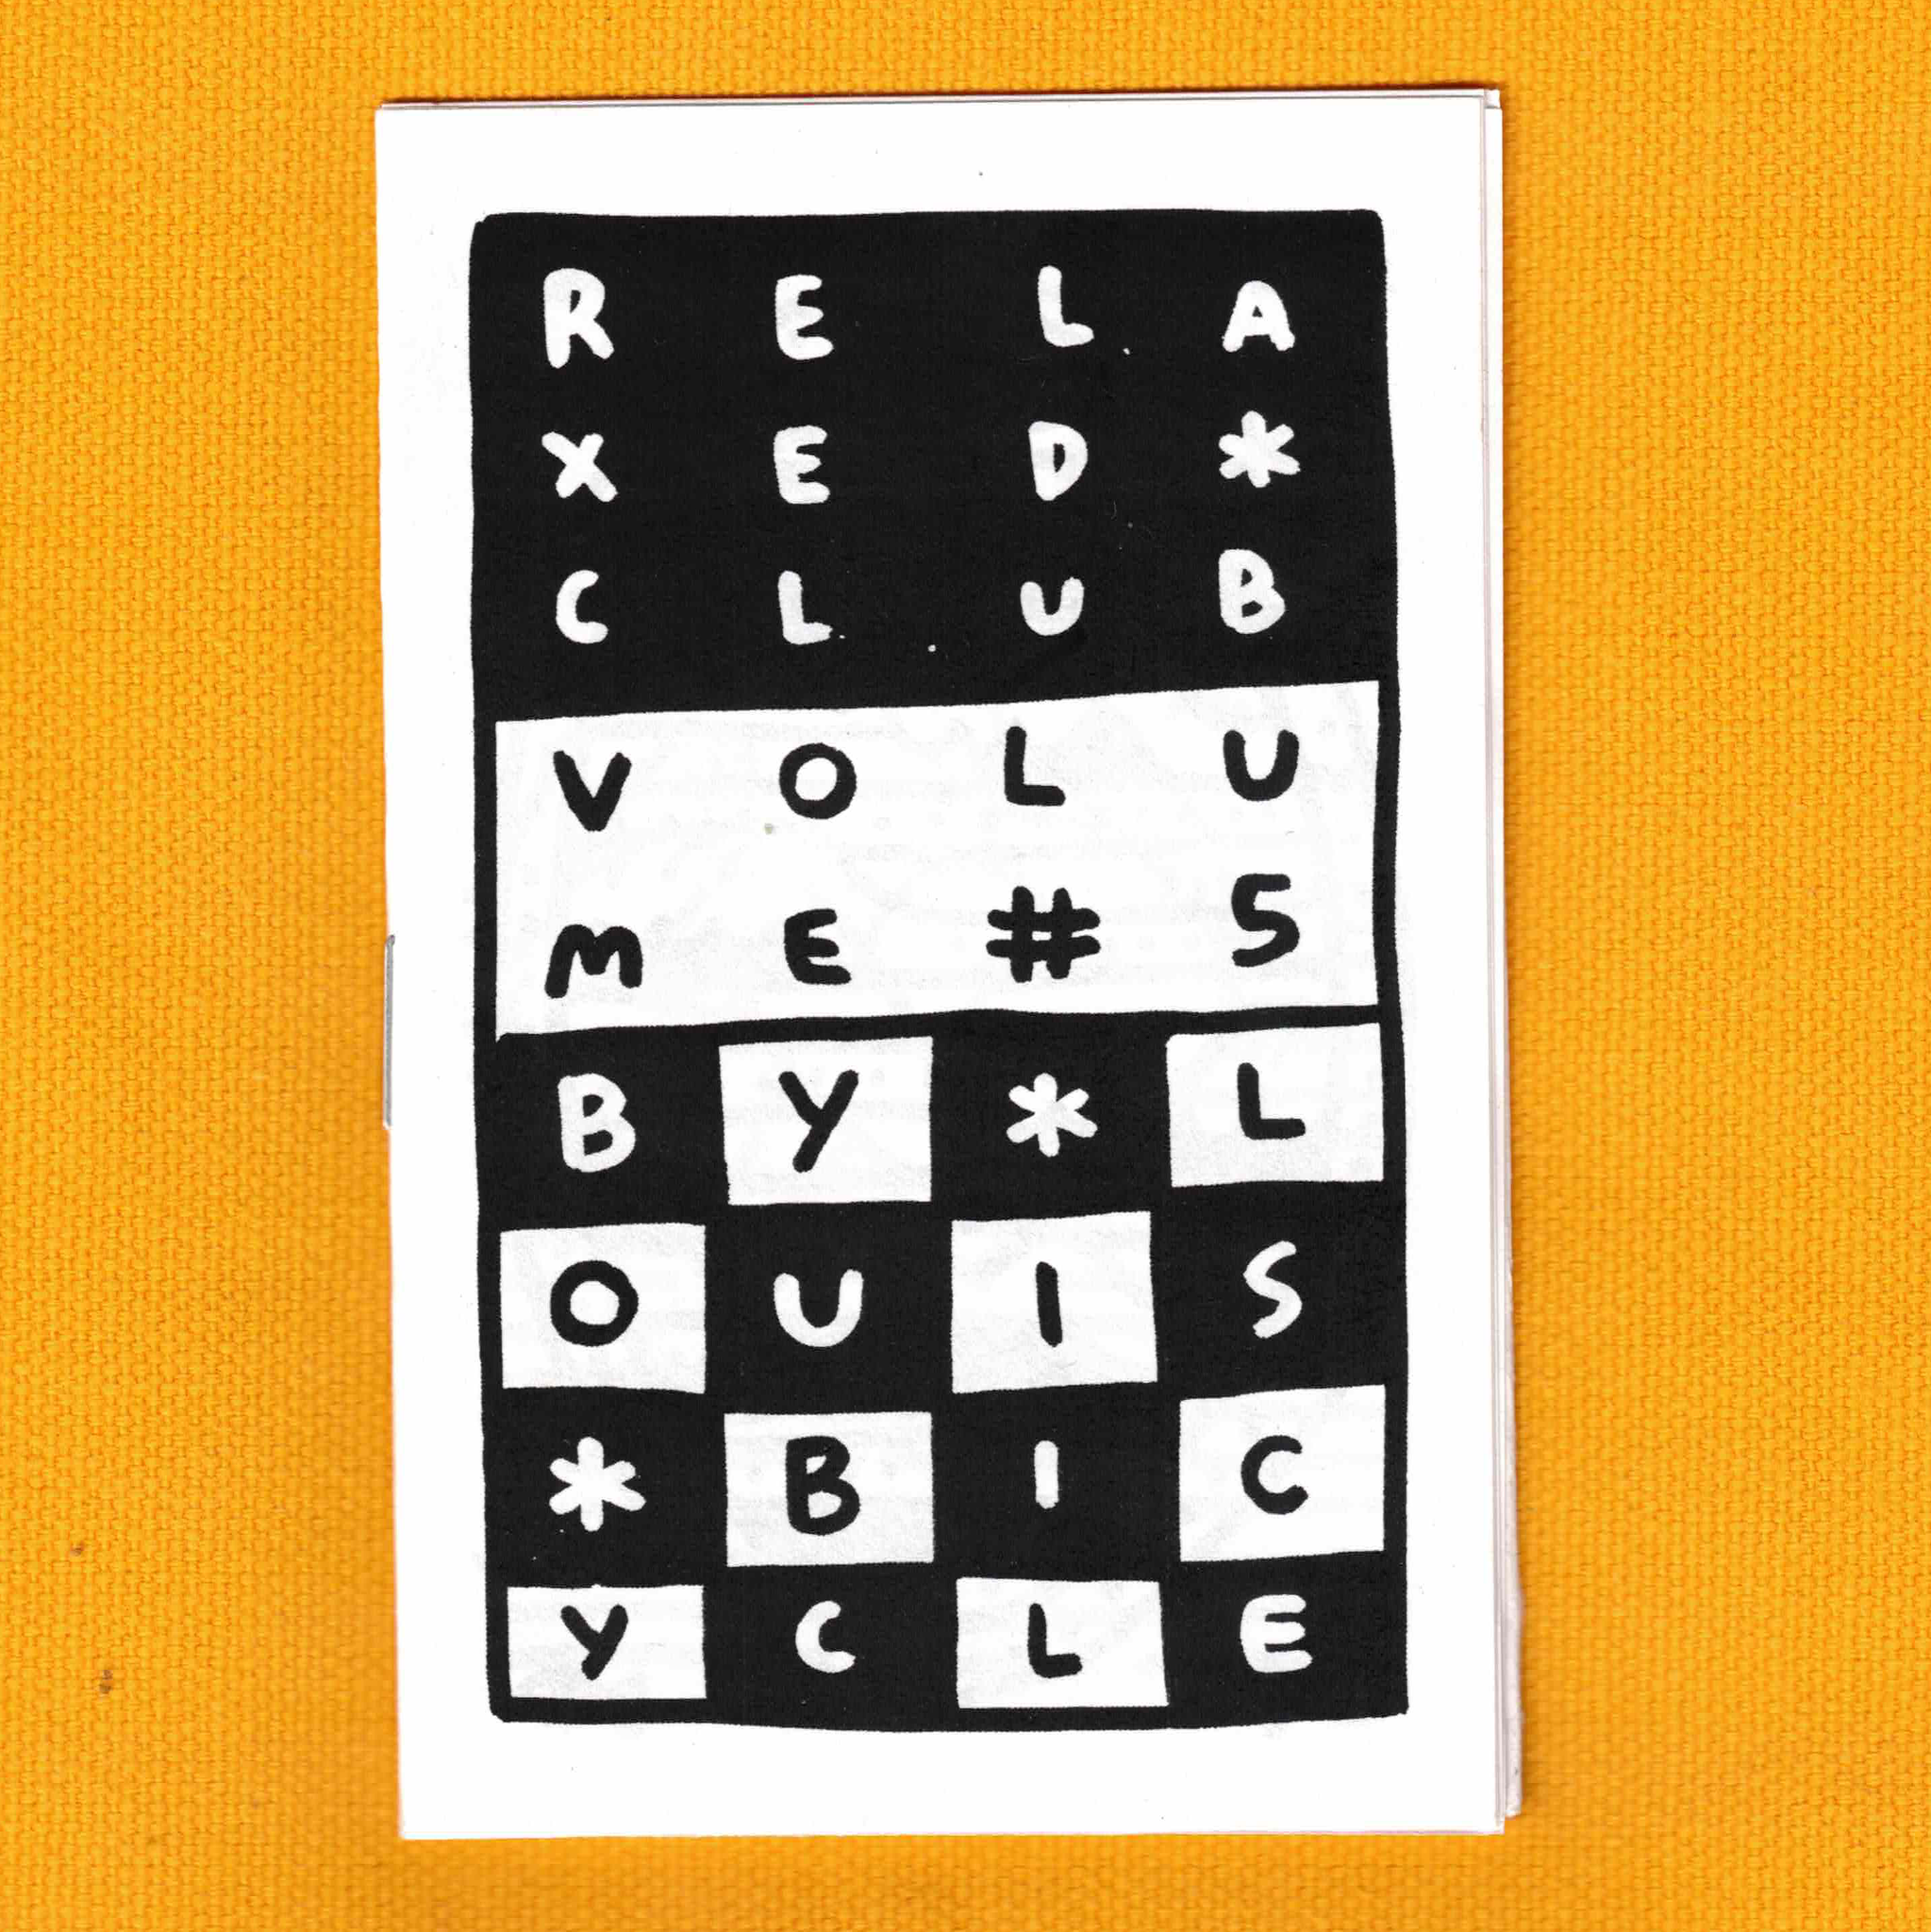 Relaxed Club Zine - Volume 5 - 2019